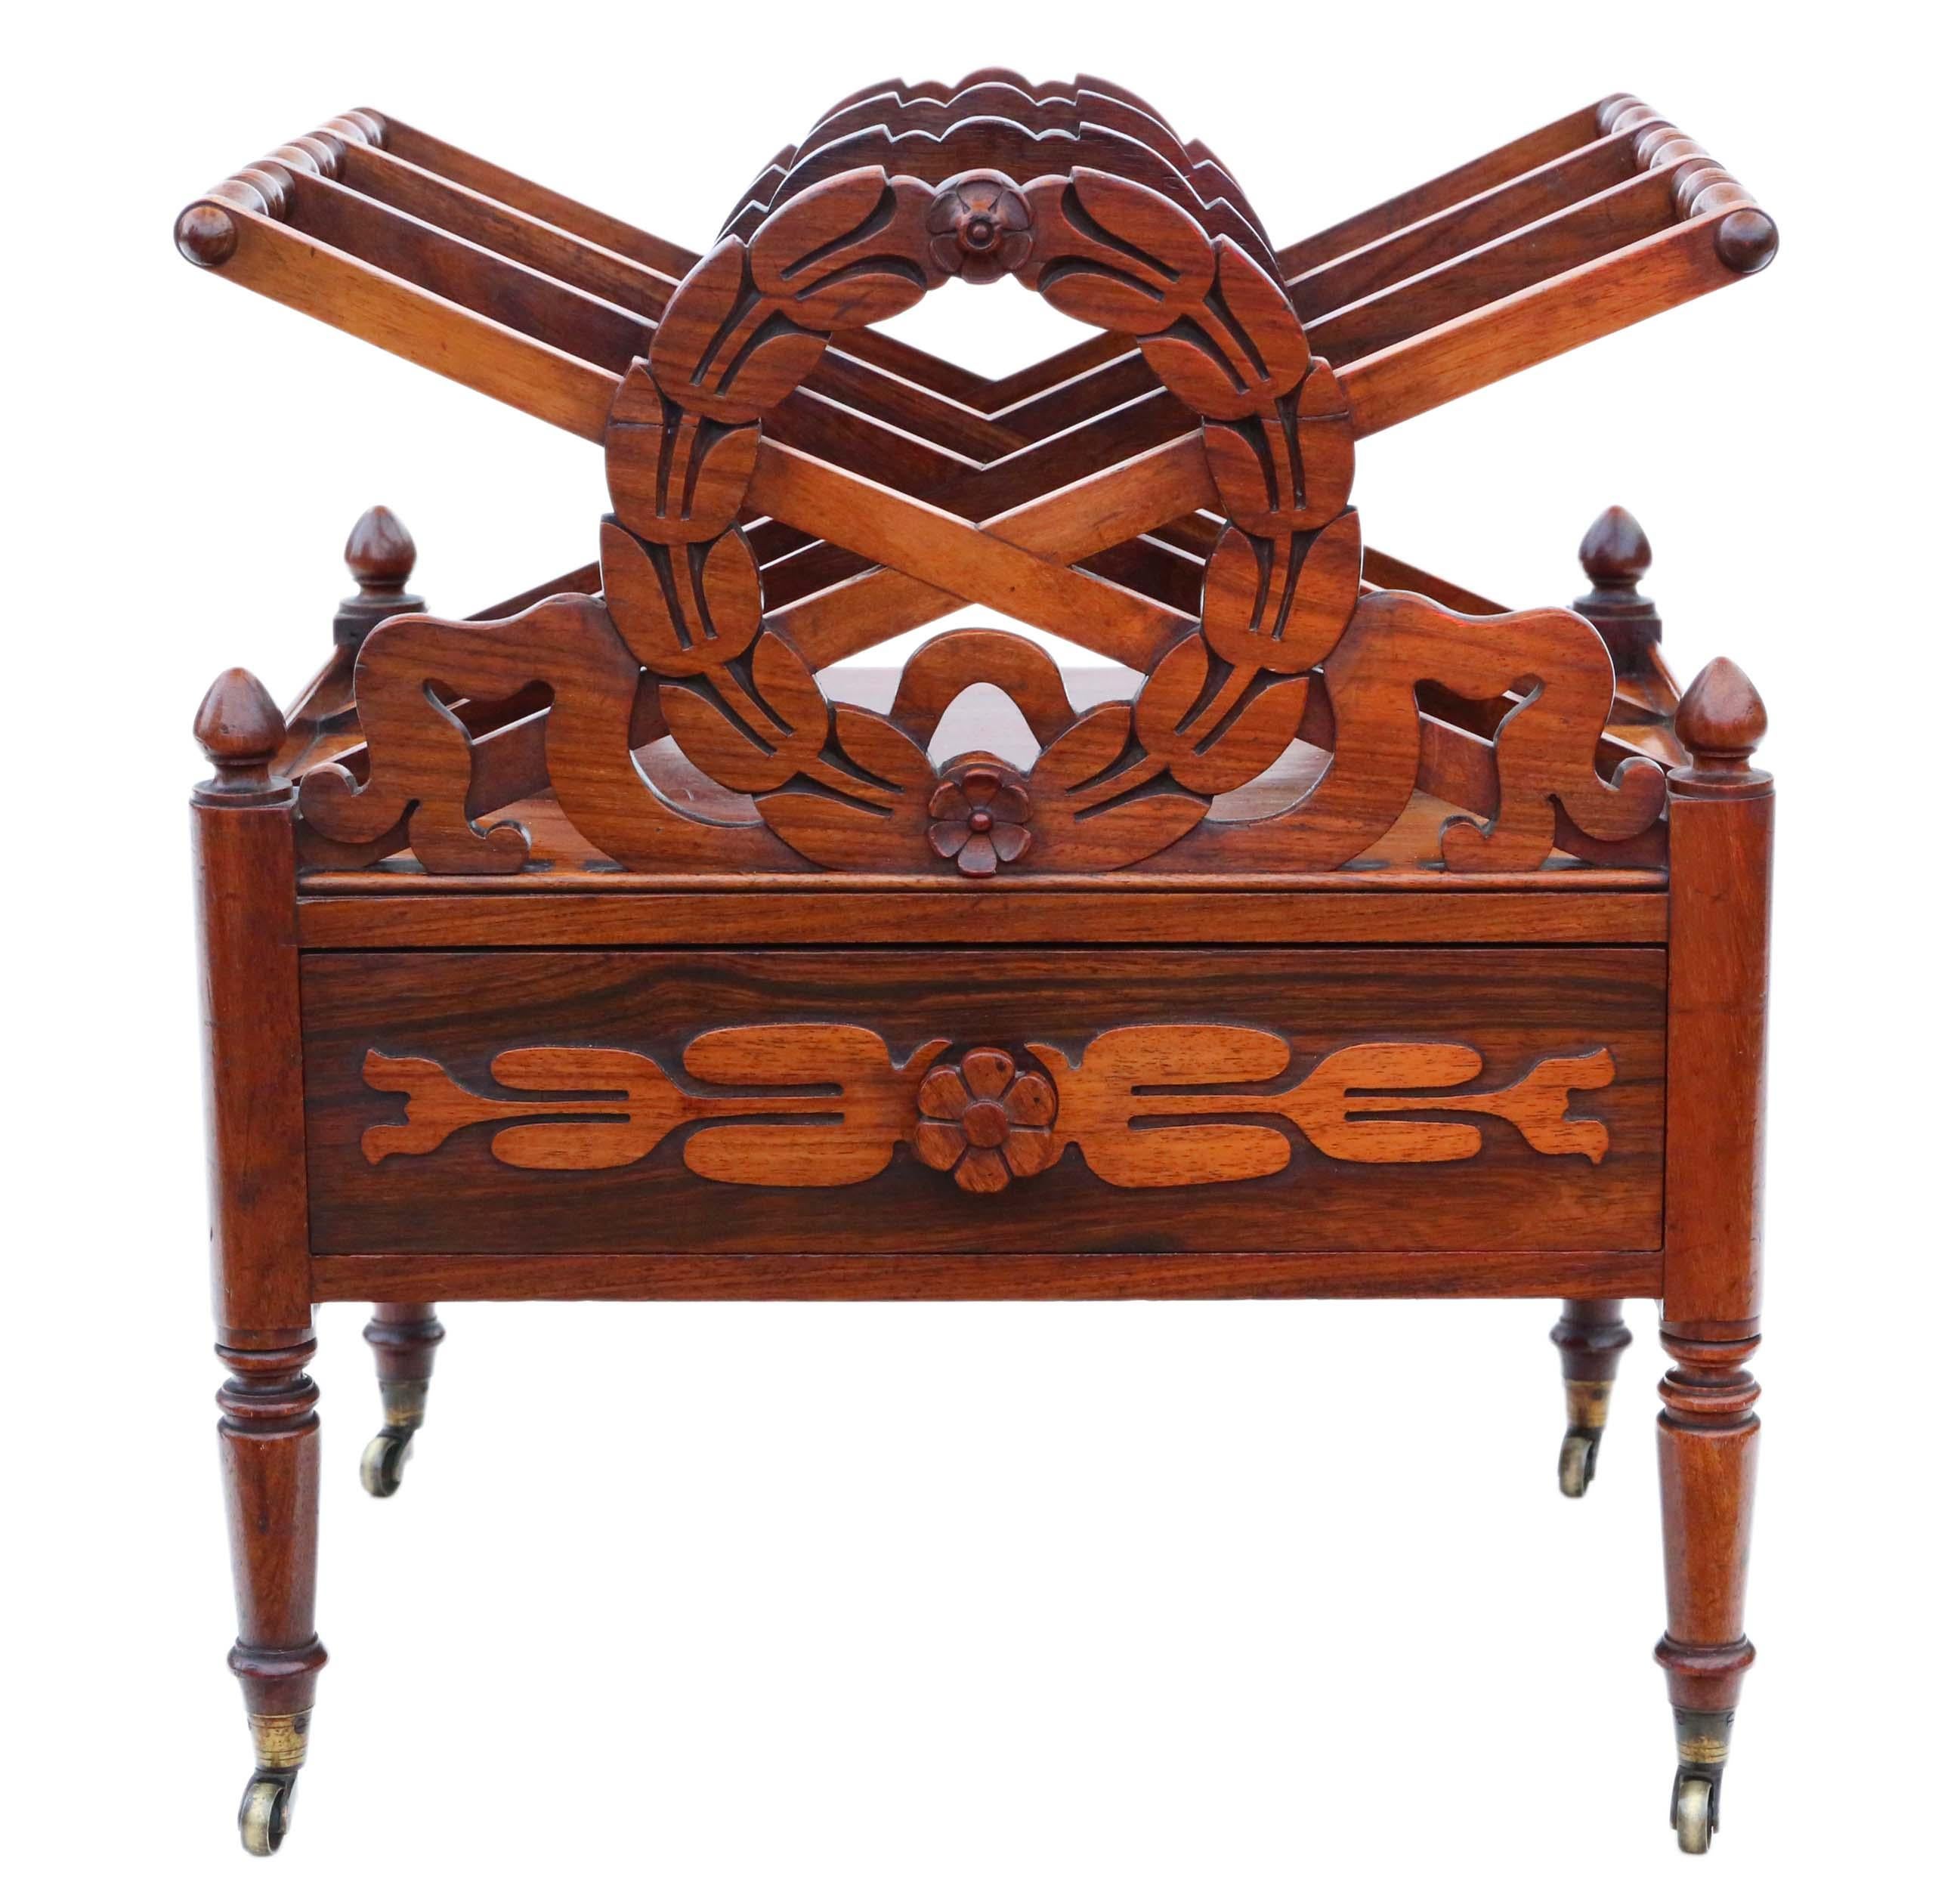 Antique fine quality Regency circa 1825 mahogany Canterbury magazine rack.

This is a lovely item, that is full of age, charm and character. Stands on period brass castors.

An attractive and rare quality piece, with a lovely decorative